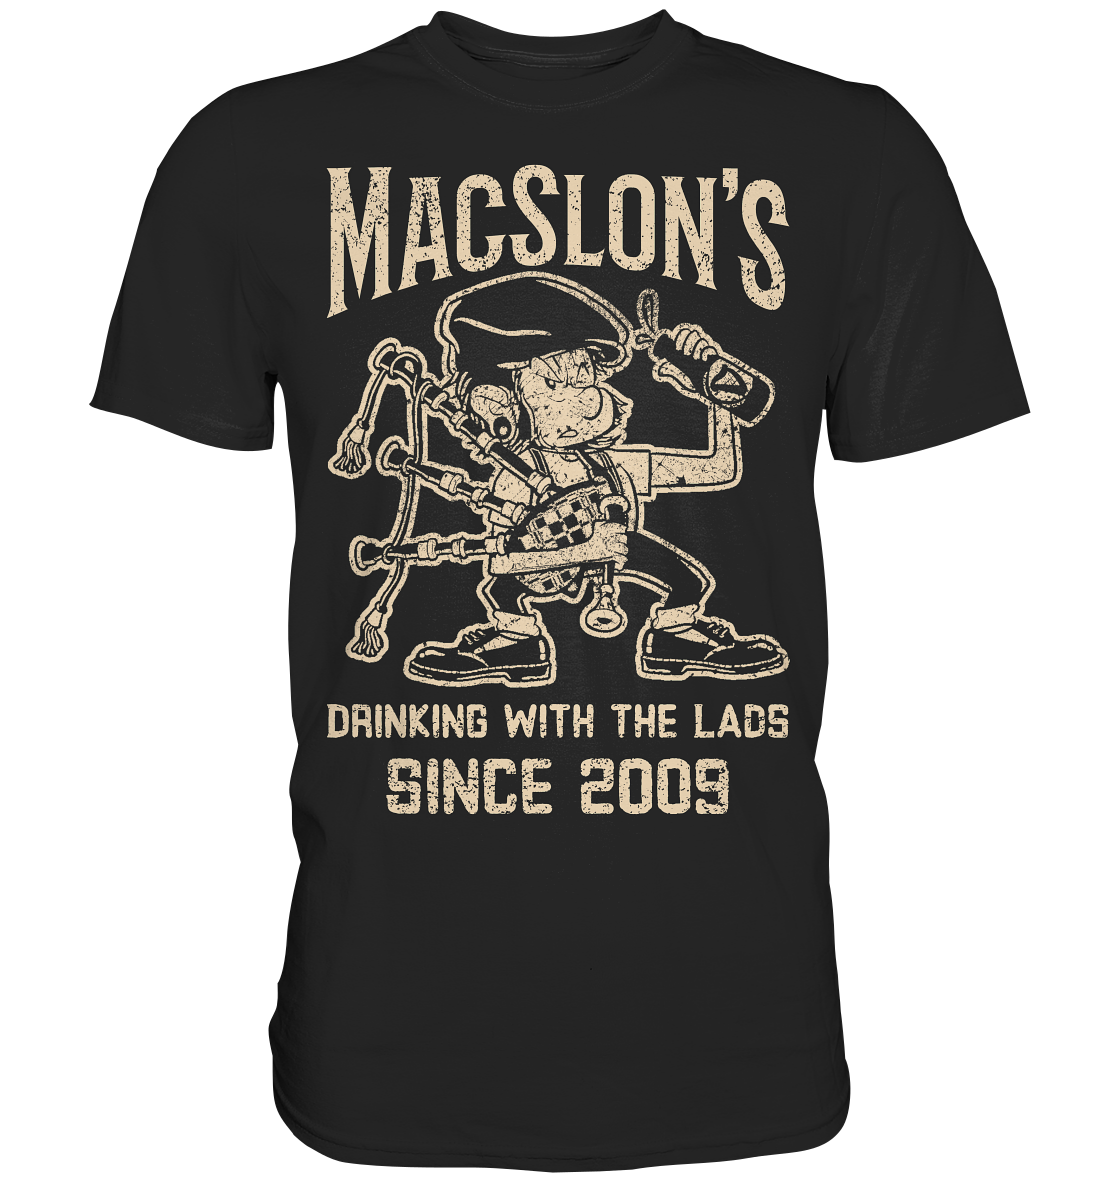 MacSlon's "Drinking With The Lads" - Premium Shirt